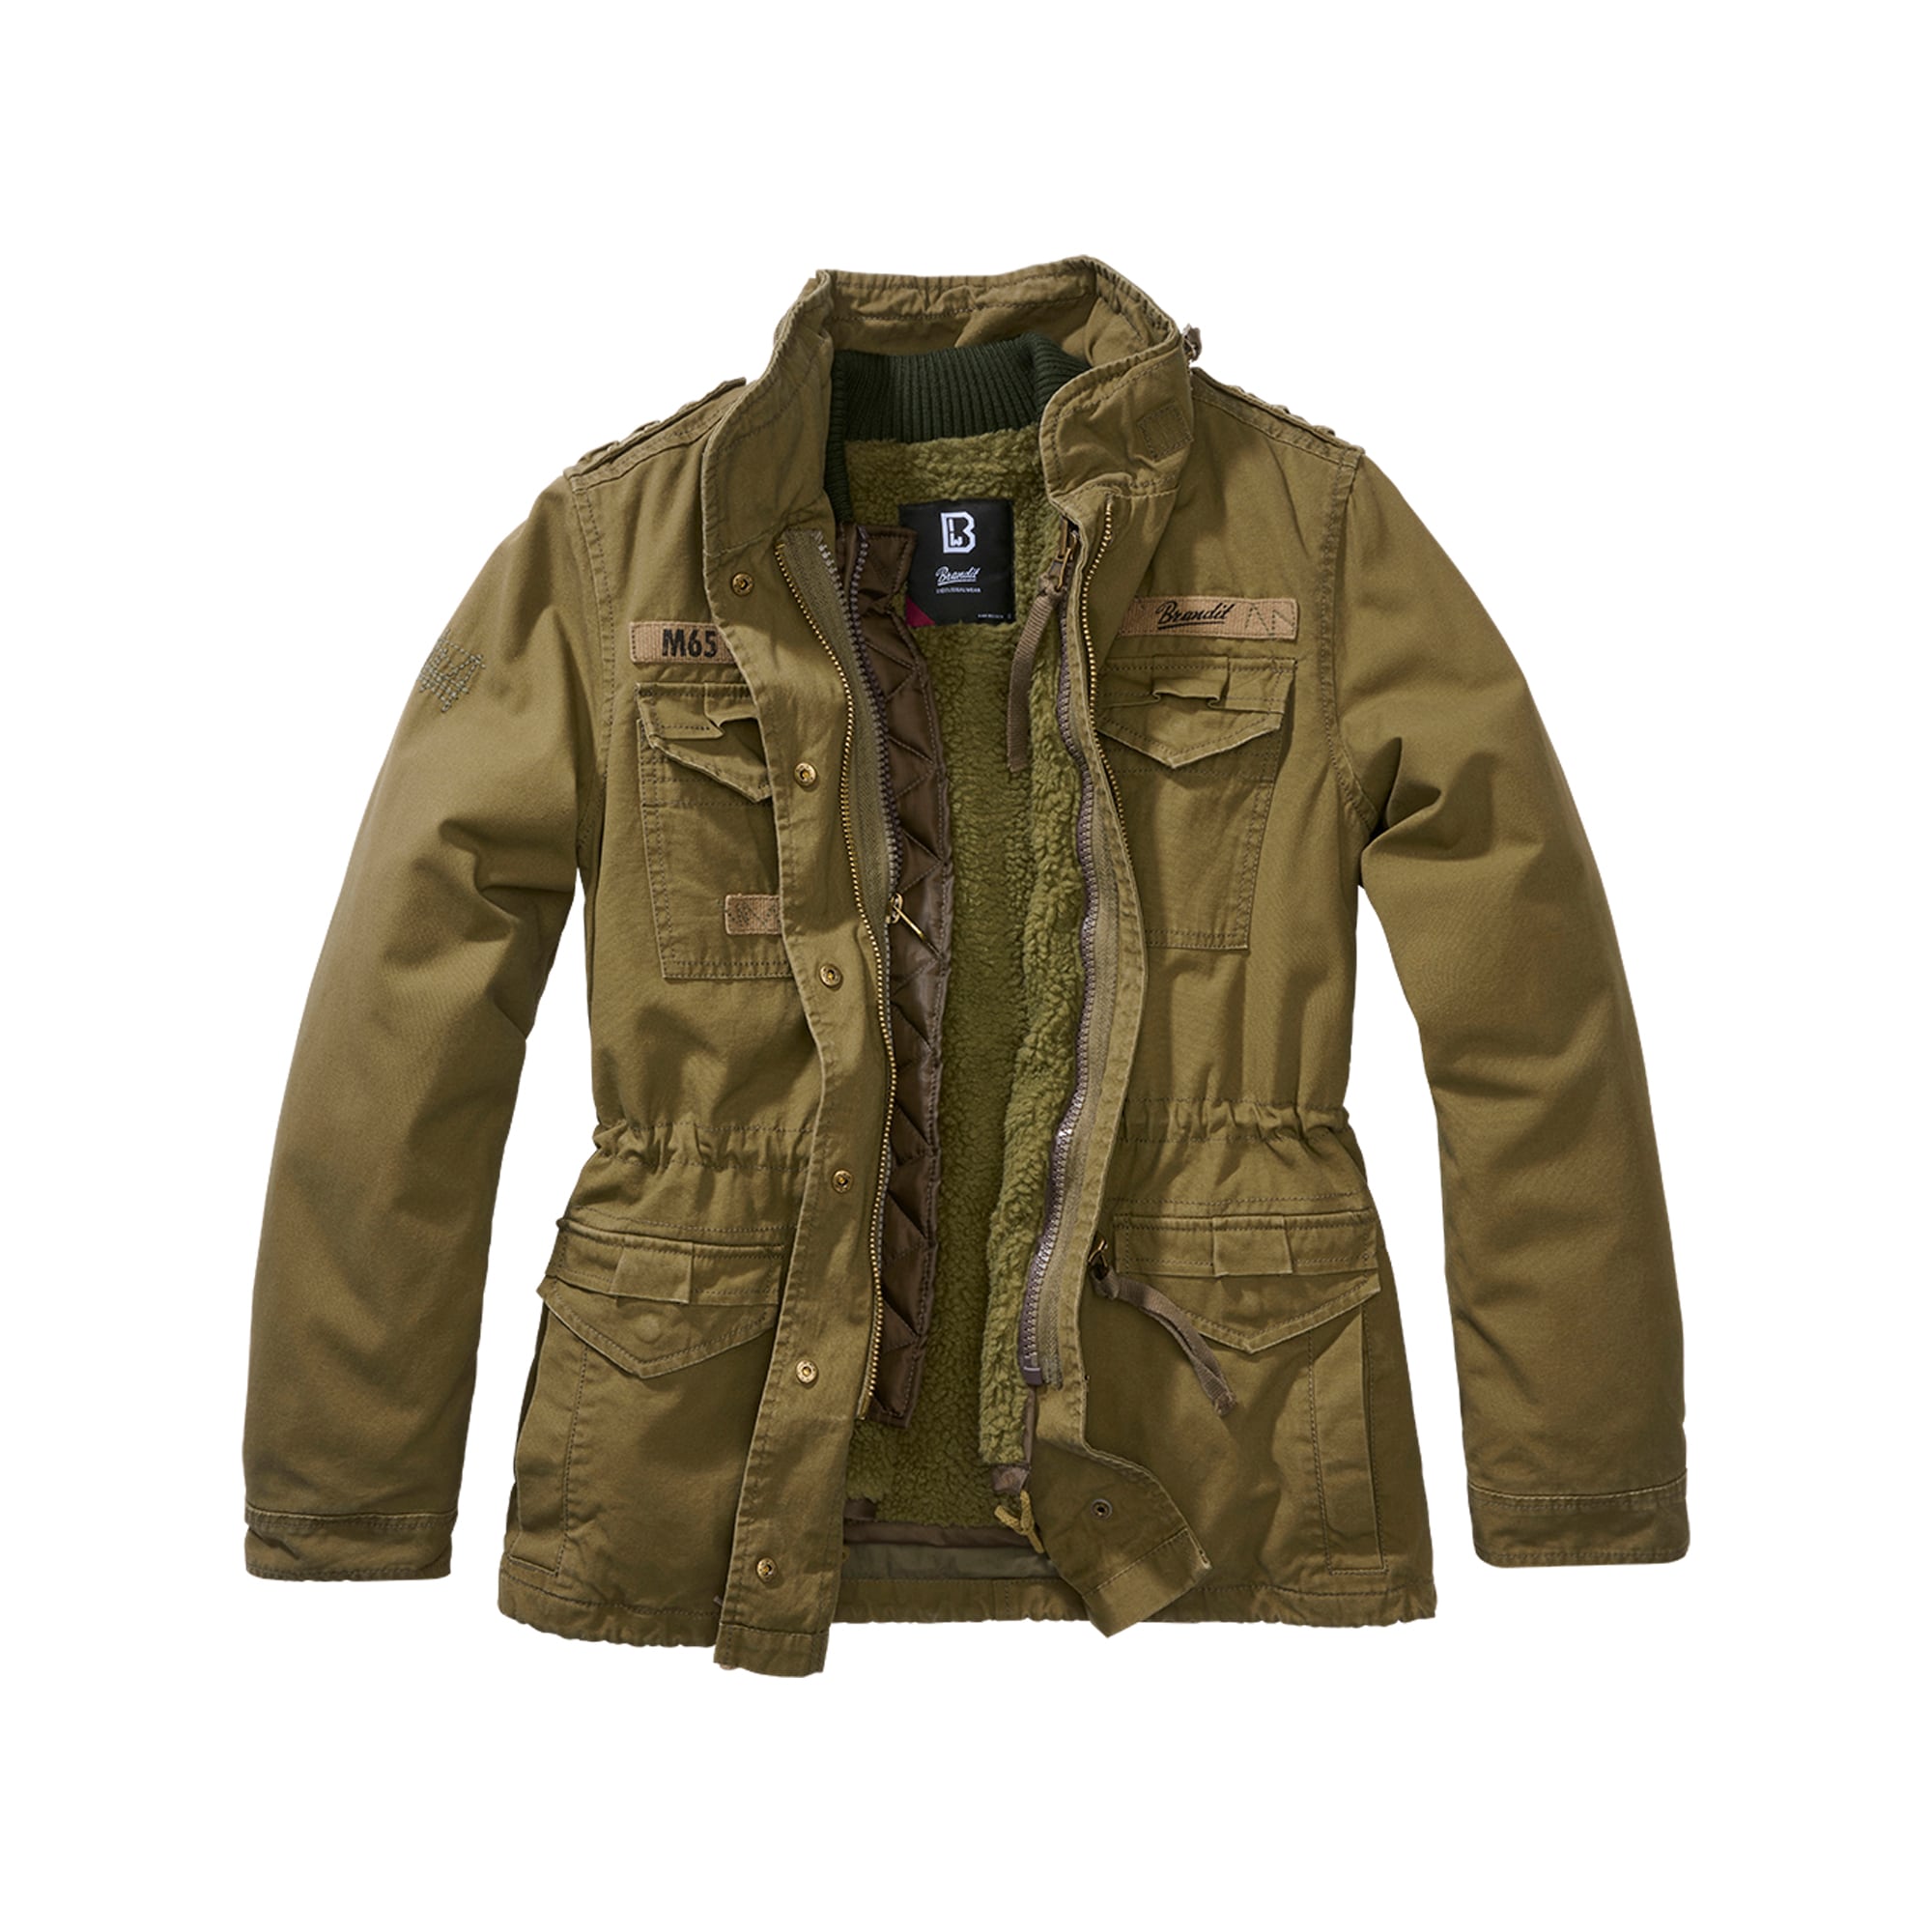 Purchase the Brandit Women's M65 Giant Jacket olive by ASMC